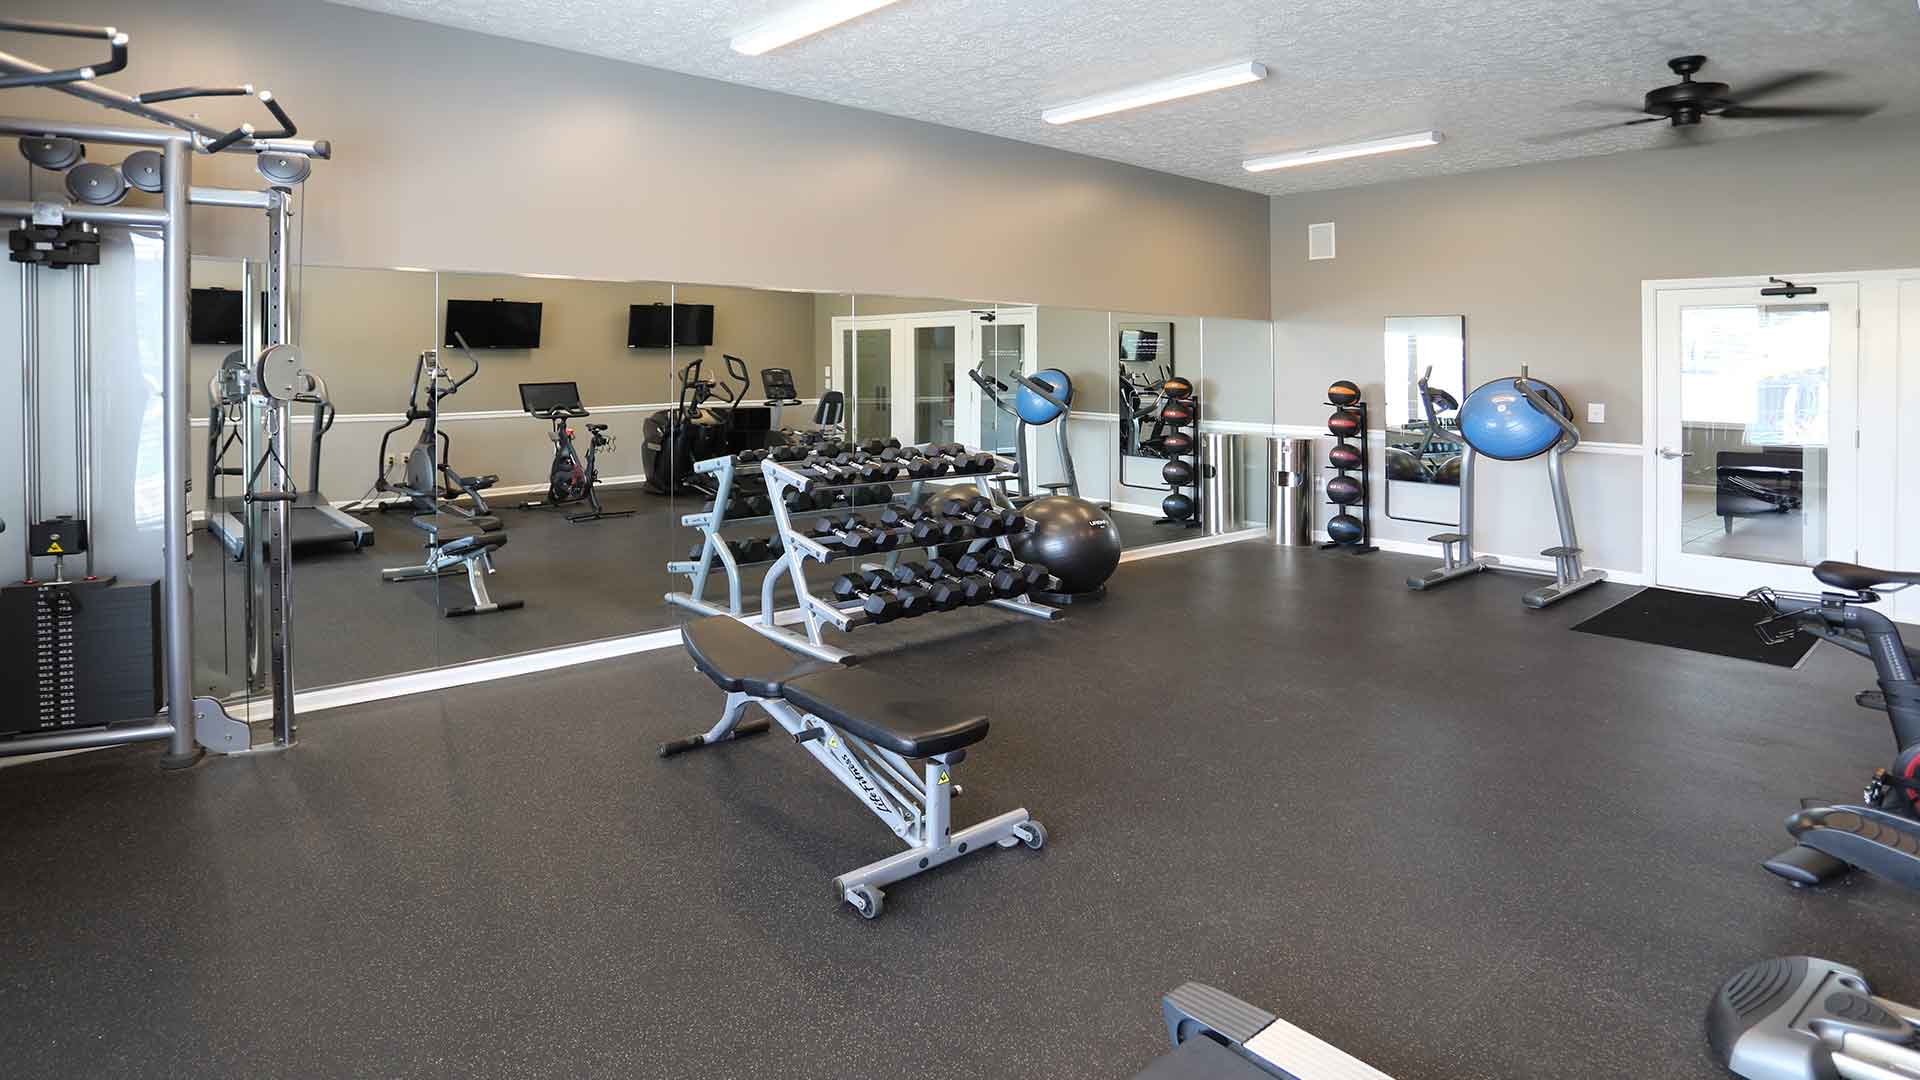 Fully equipped fitness center with free weights at Shadow Ridge.